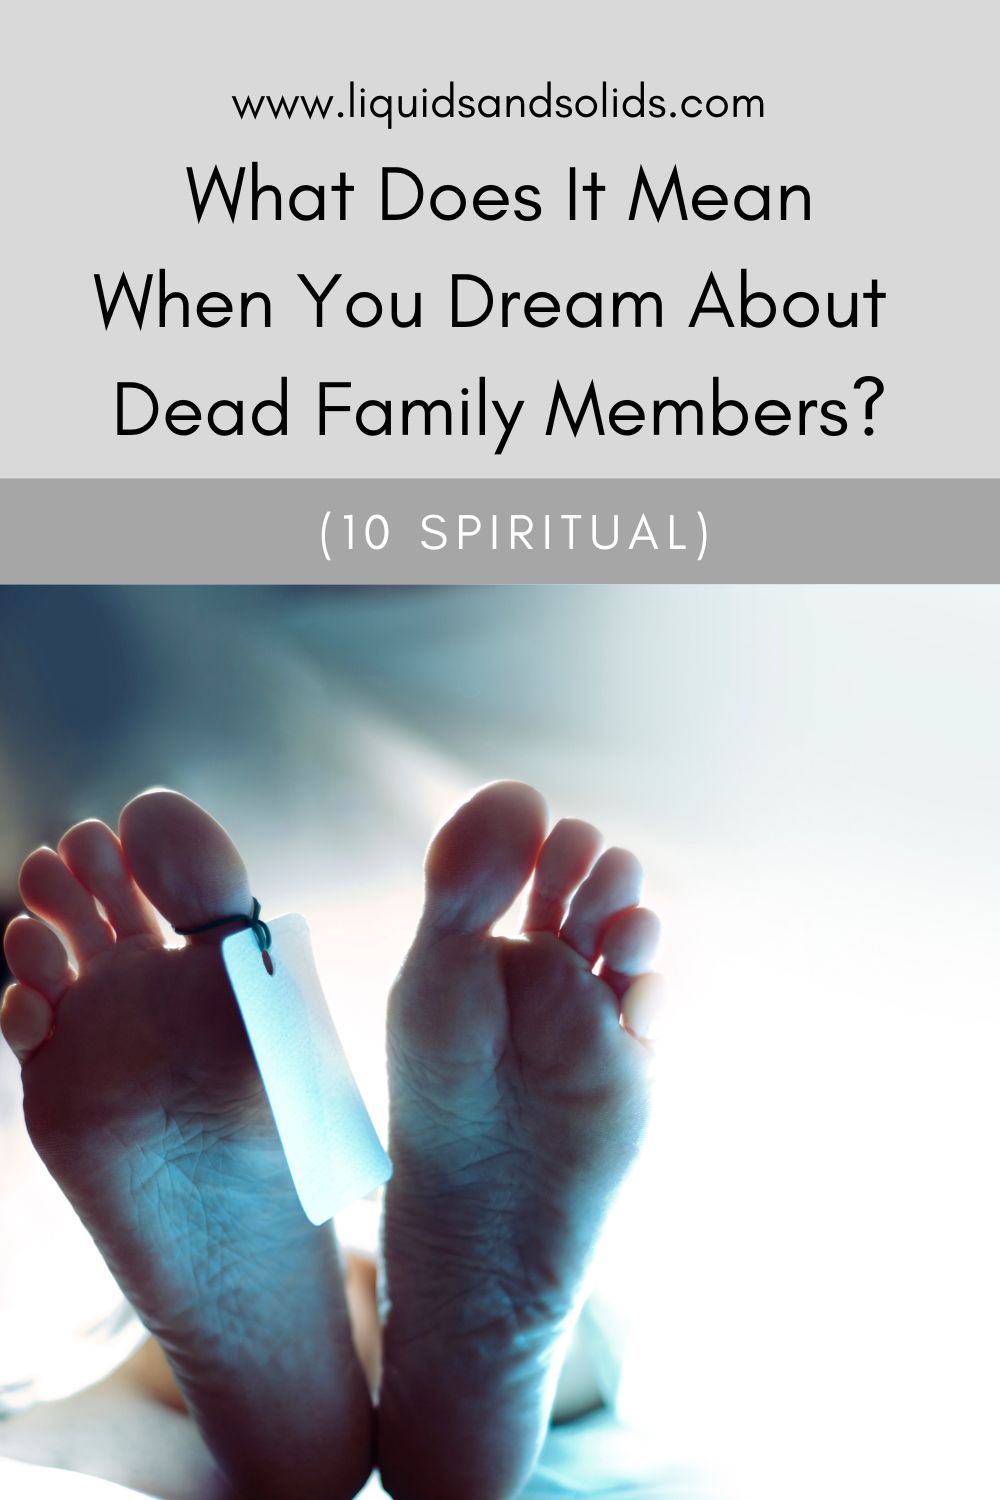 Dead Person Dreams: A Look Into Deeper Meaning